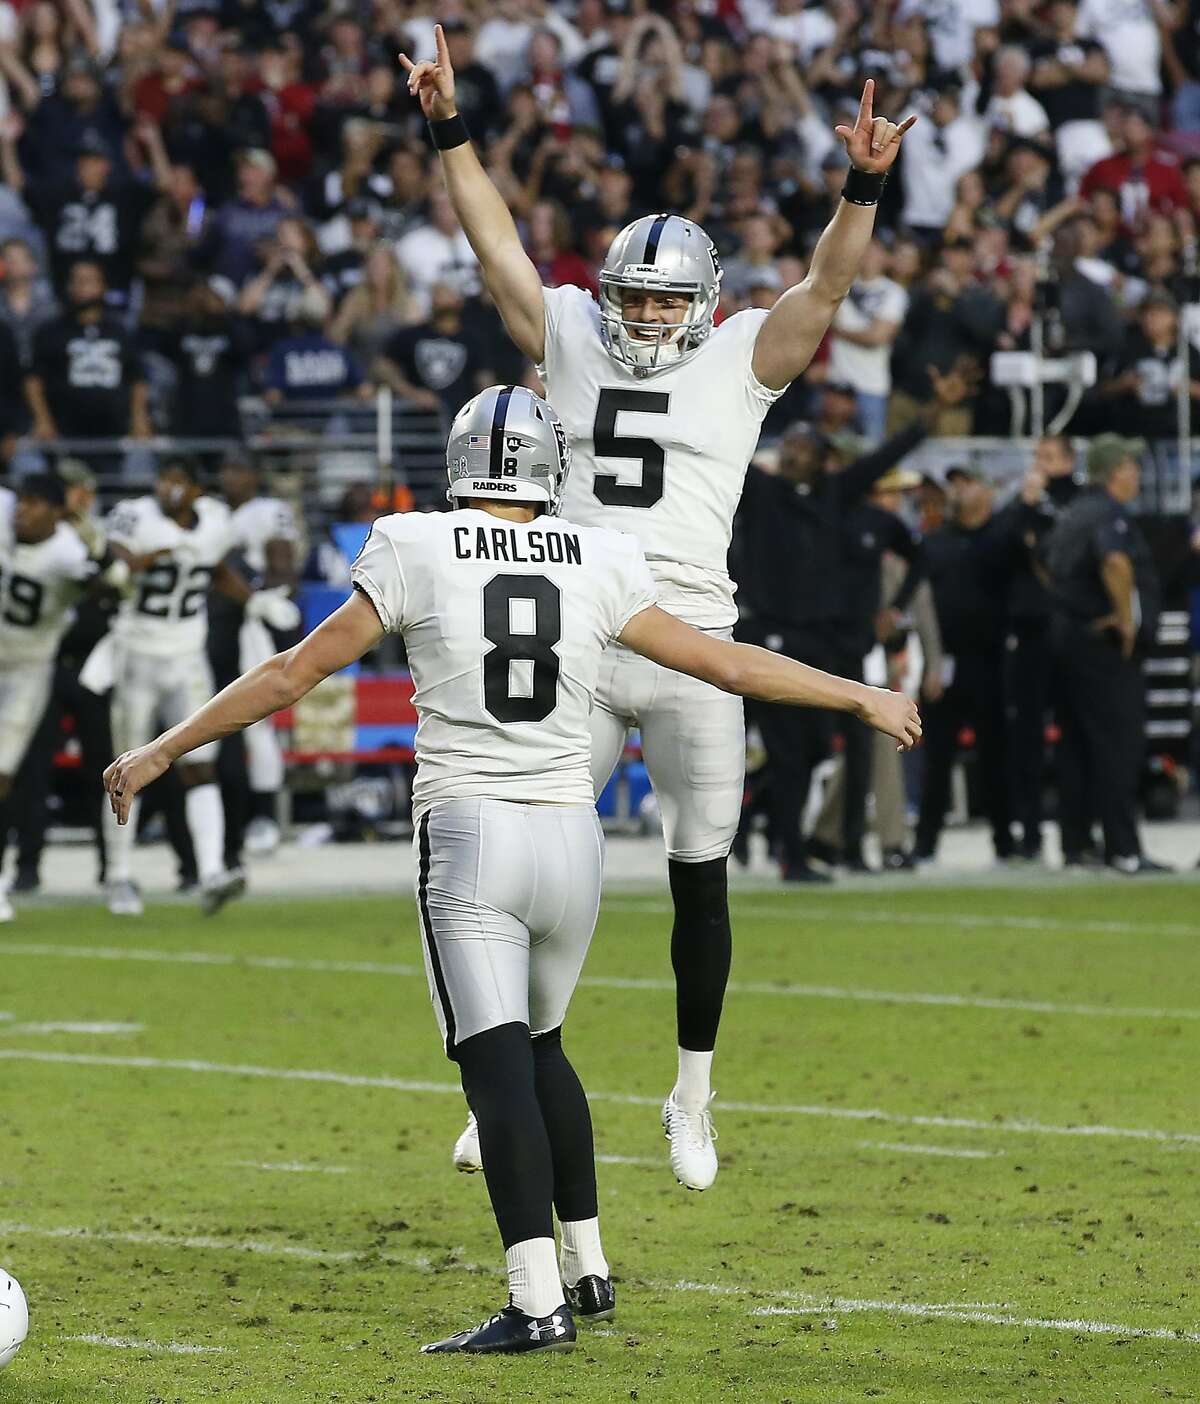 Raiders' Gruden on Carlson: 'We think he's going to work himself